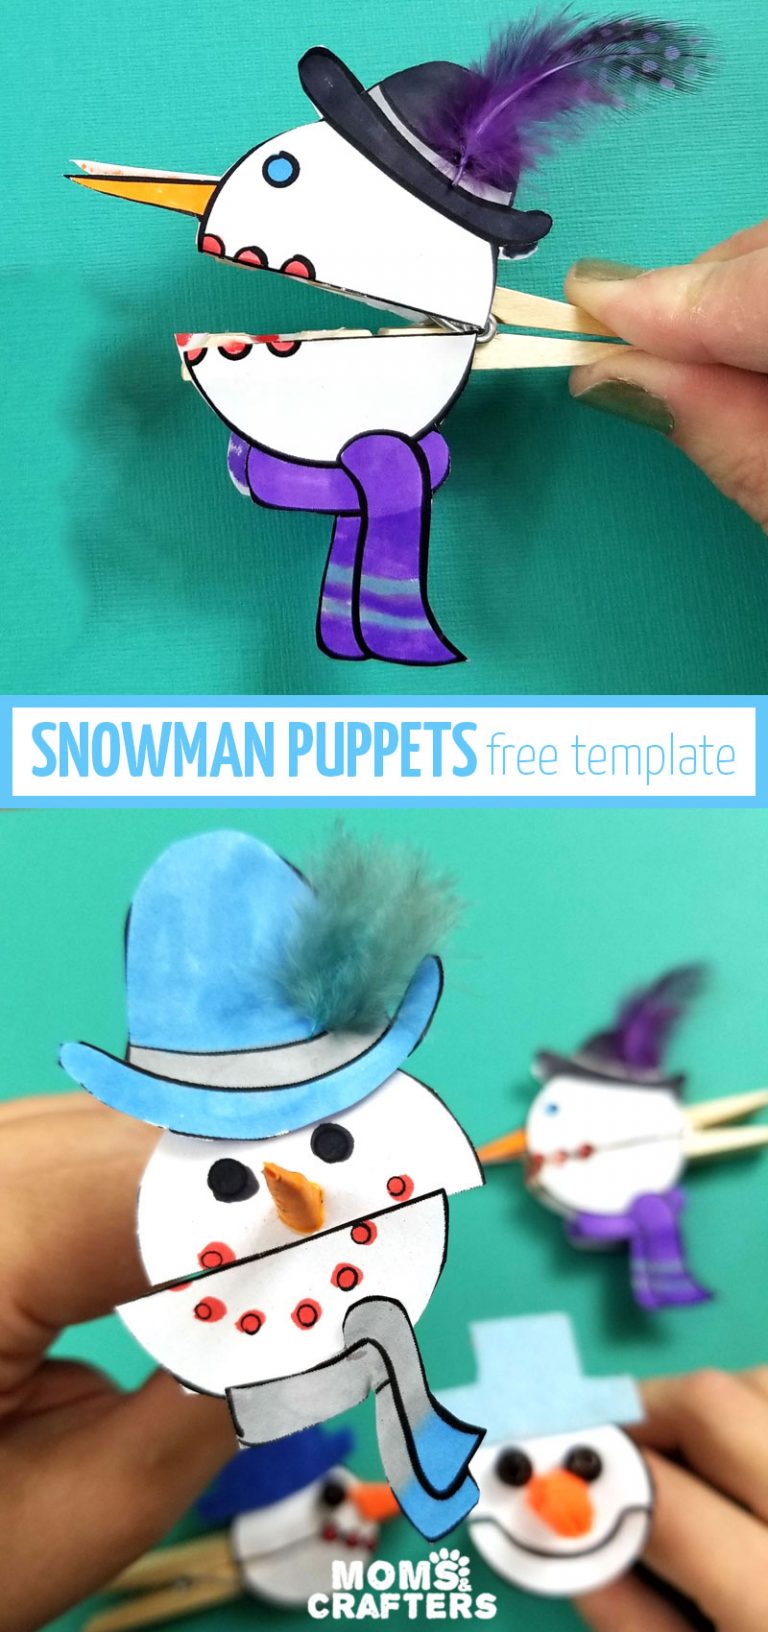 Snowman Puppets with Clothespin - free template! * Moms and Crafters